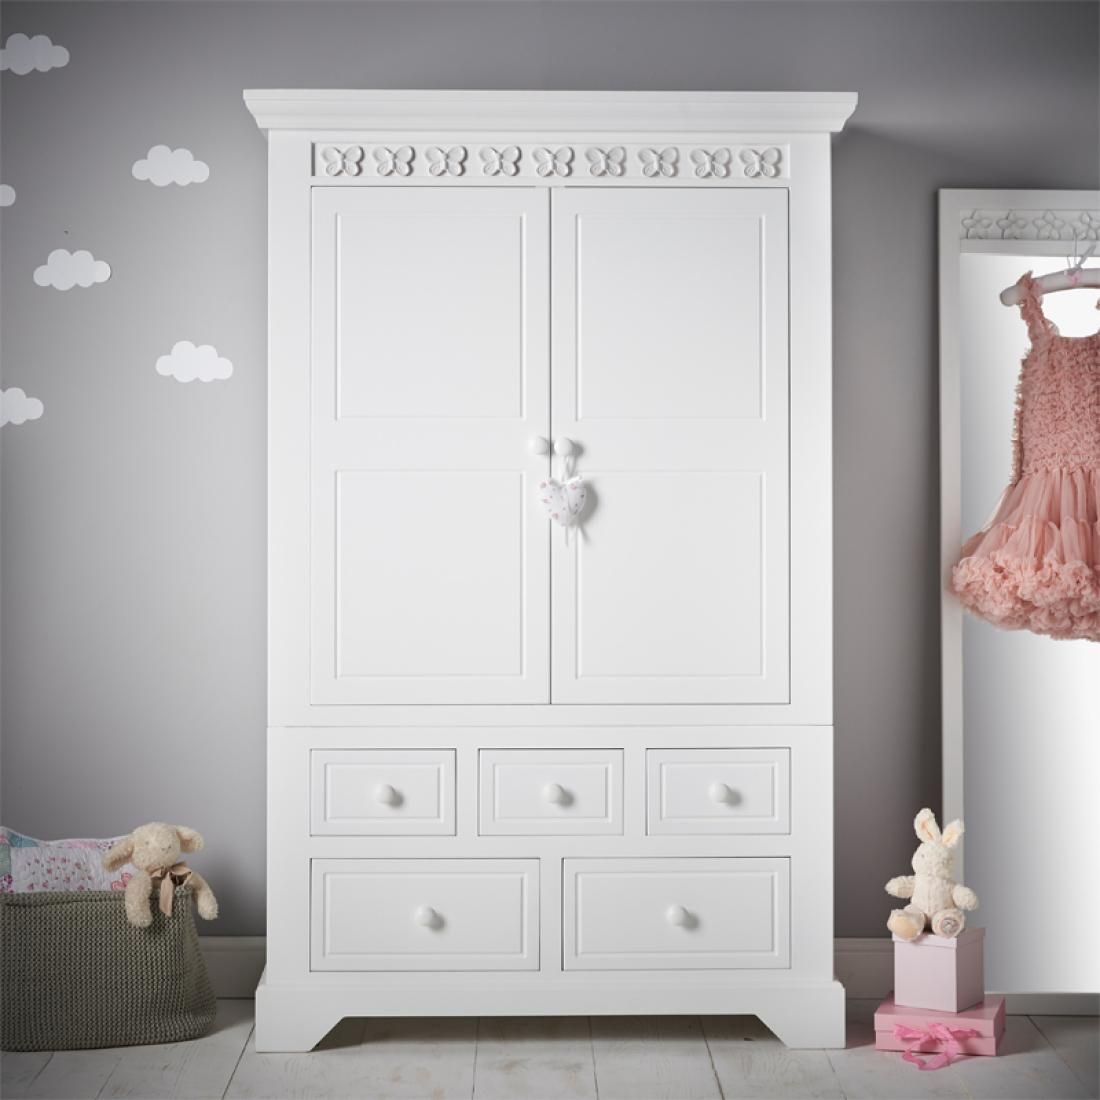 Florence Flutterby Combination Wardrobe | Childrens Wardrobe | Kids Wardrobe Pertaining To Chest Of Drawers Wardrobes Combination (View 10 of 15)